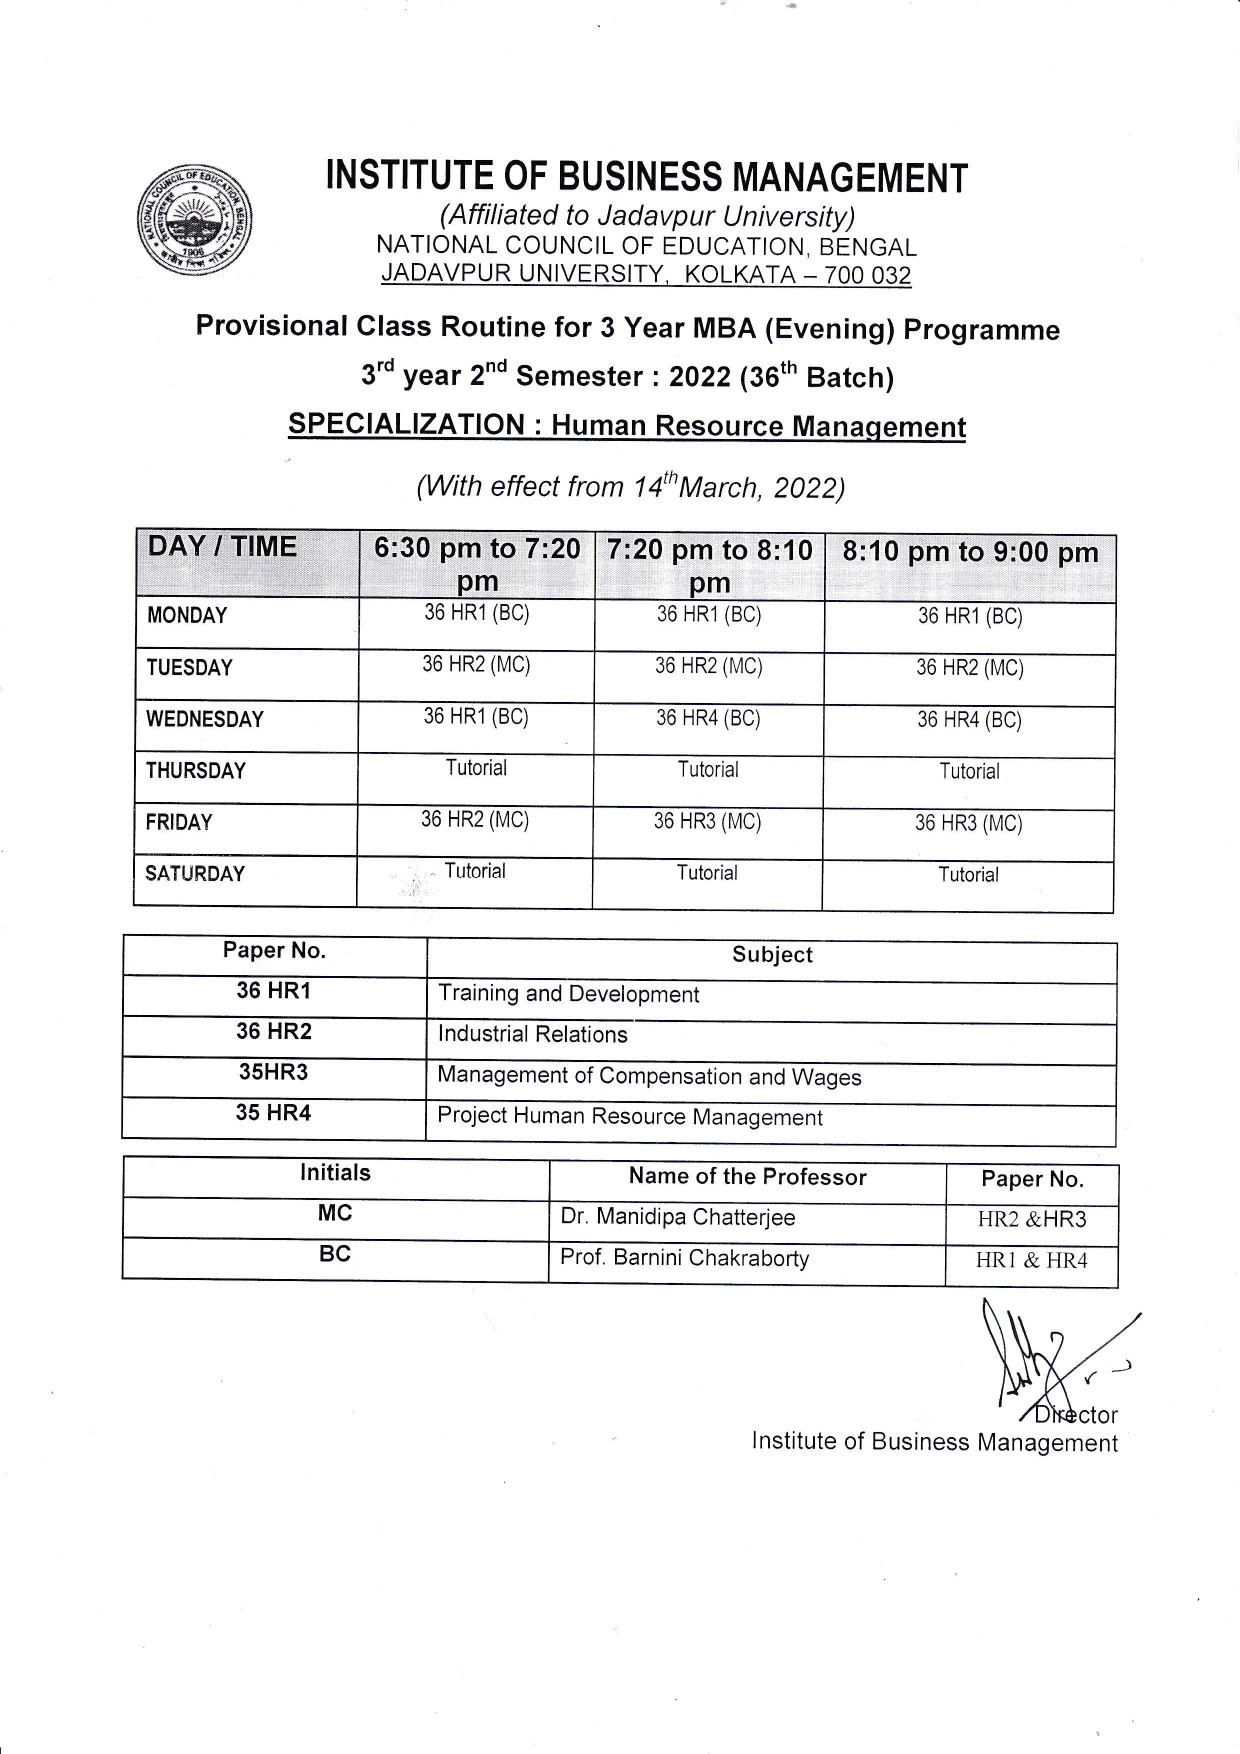 Provisional Class Routine for MBA 36th Batch (HR)